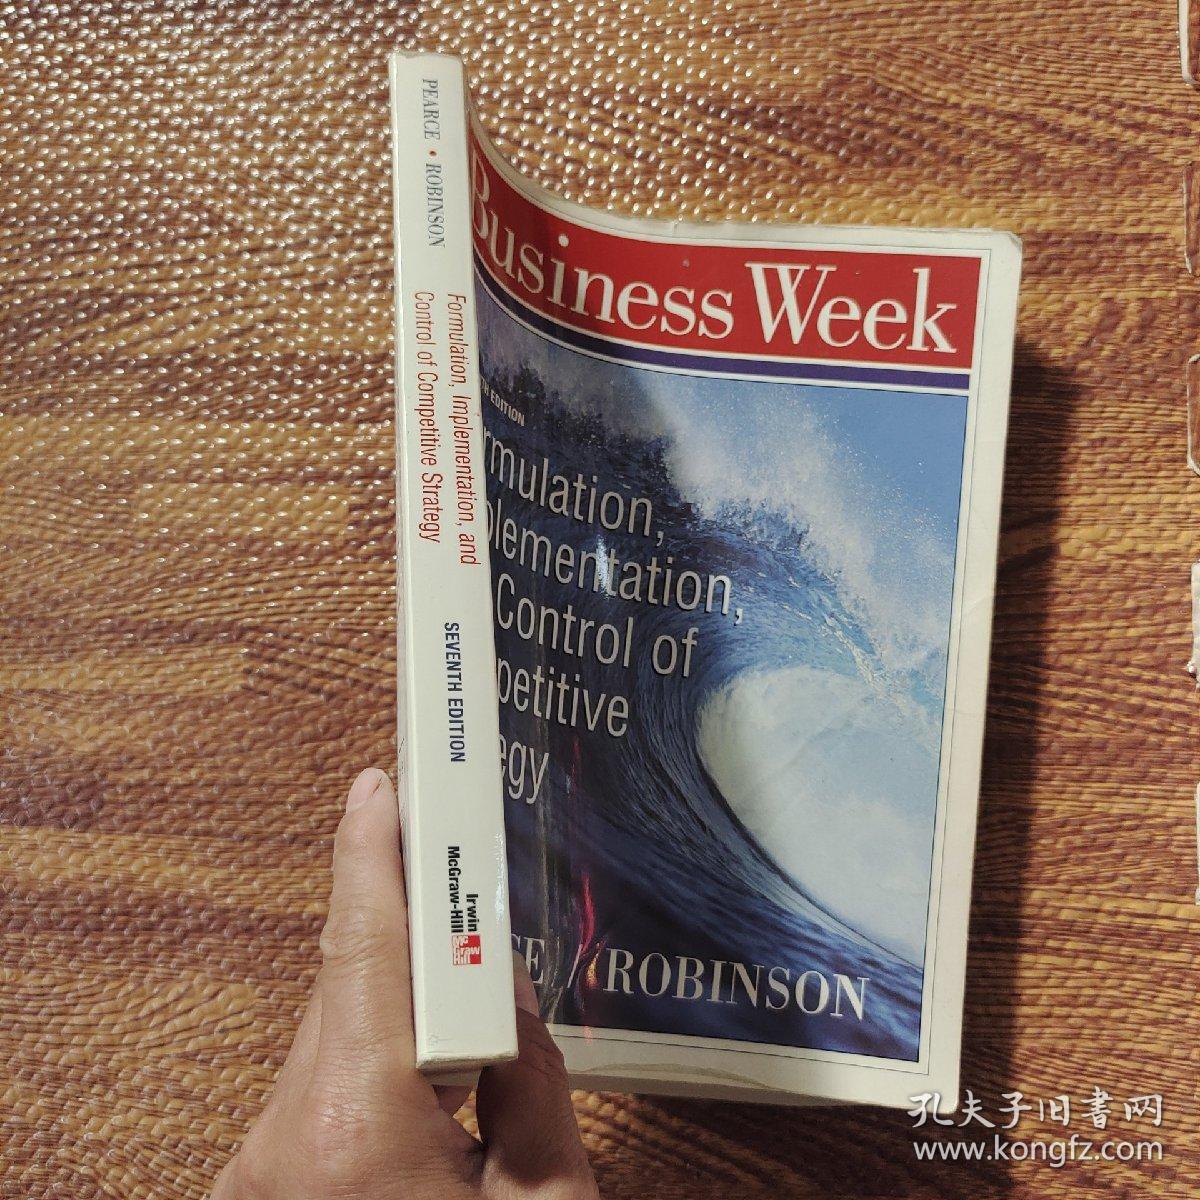 BusinessWeek SEVENTH EDITION Formulation Implementationy and Control of Competitive Strategy